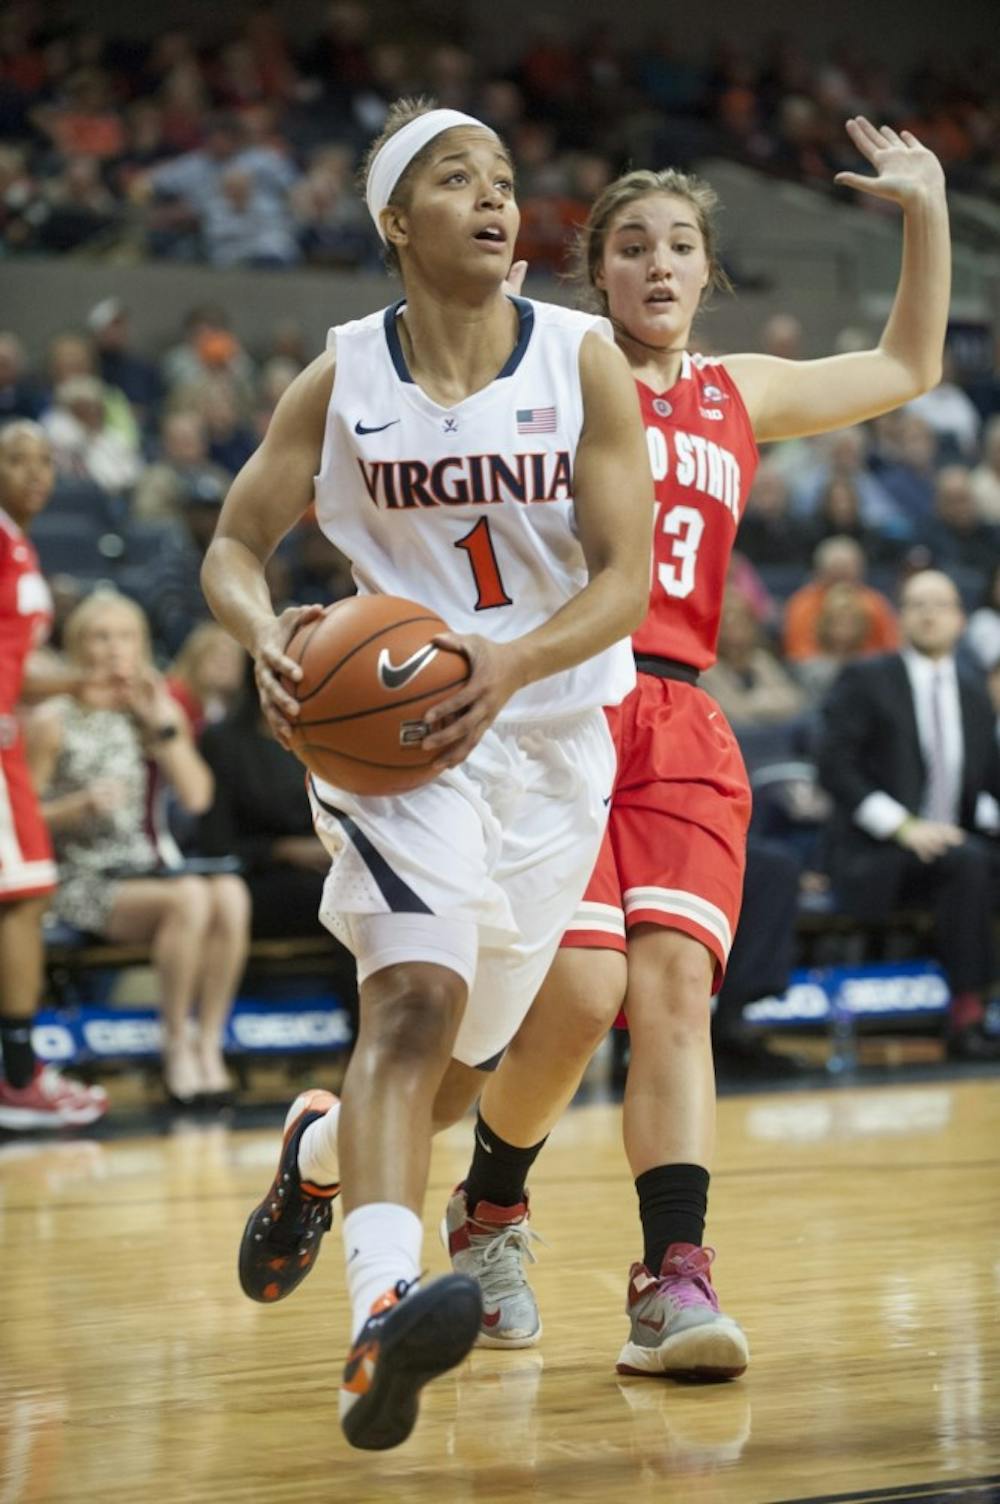 <p>Sophomore guard&nbsp;Mikayla Venson and Virginia will face NC State in&nbsp;Broughton High School's gym Wednesday.</p>